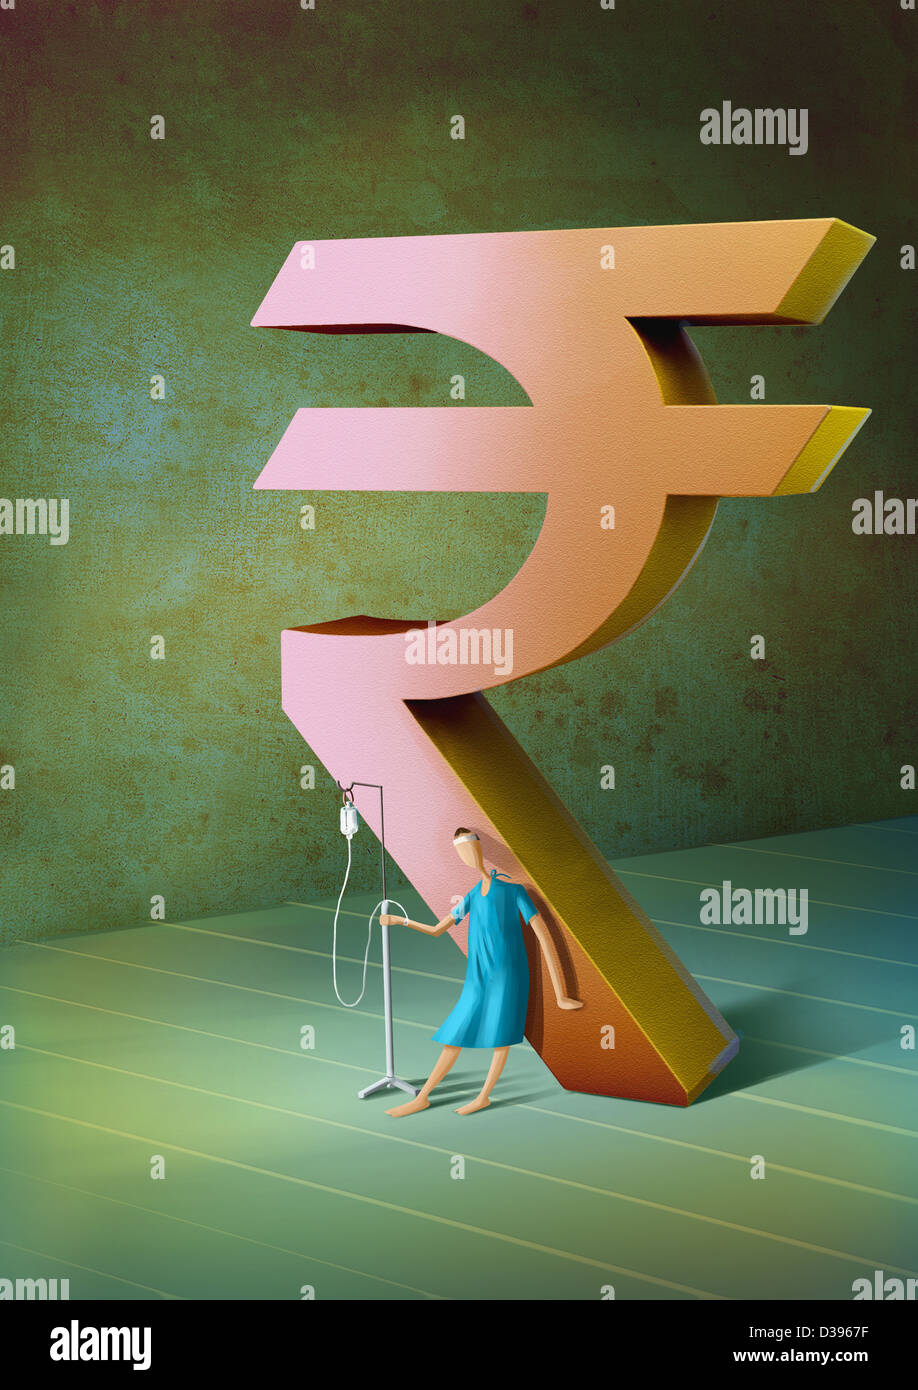 Male patient with standing intravenous drip leaning to Indian Rupee symbol Stock Photo